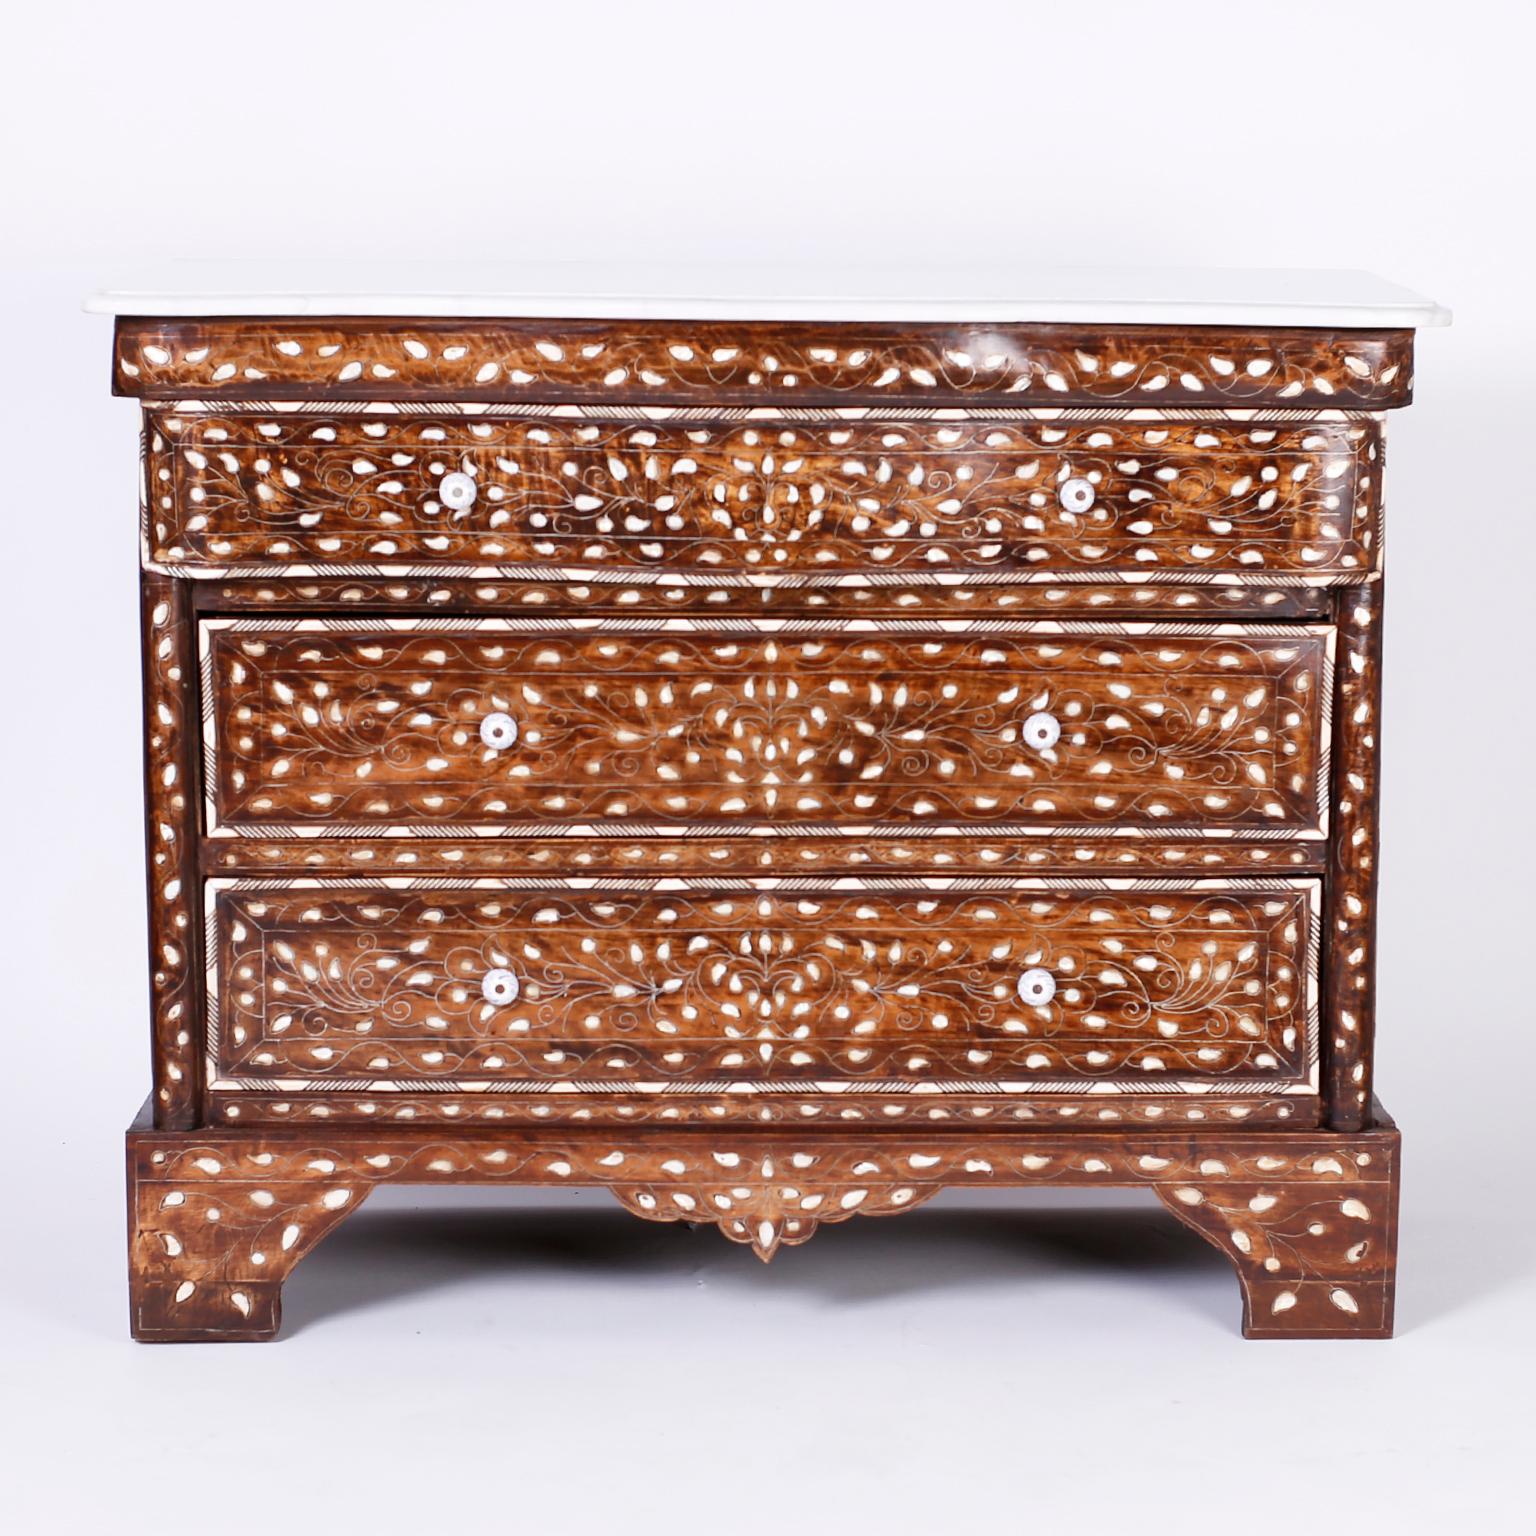 Three drawer chest or commode featuring a white marble top, serpentine top drawer, geometric bone borders, mother of pearl floral inlays connected by delicate painted vines, paneled sides, and classic bracket feet. 